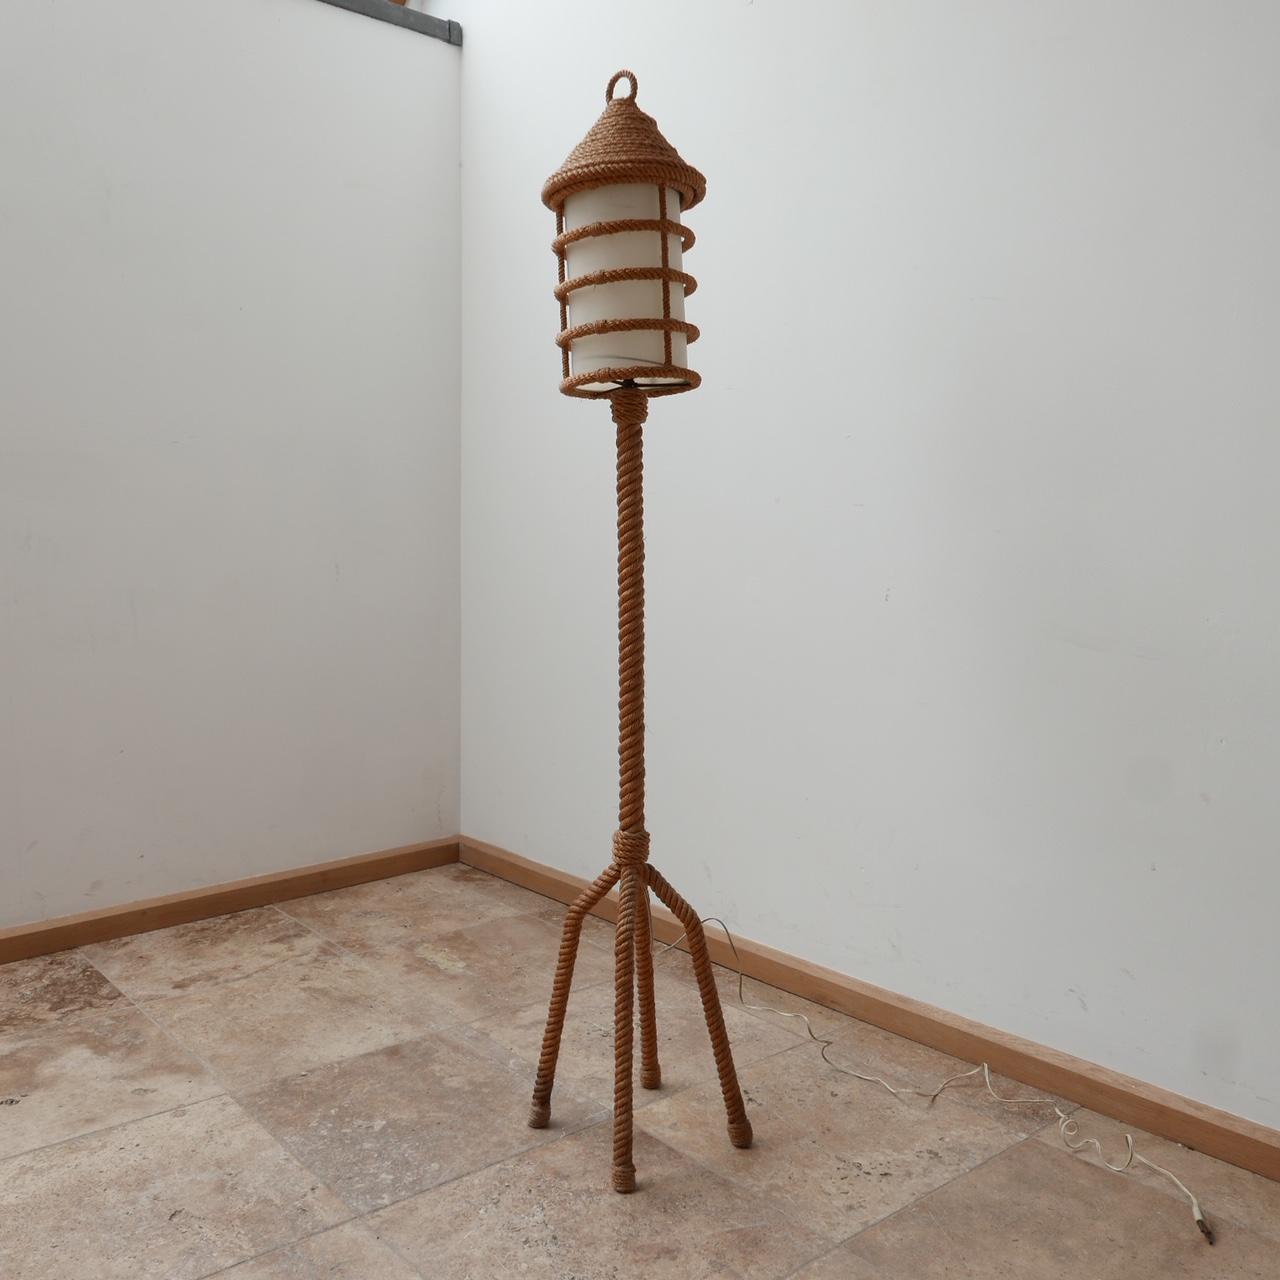 A floor lamp attributed to Audoux-Minet. 

France, c1960s. 

Rope work lamp, with original shade. 

Some wear commensurate with age but generally good condition. 

Dimensions: 114 H x 24 W x 24 D in cm.

Delivery: POA.

